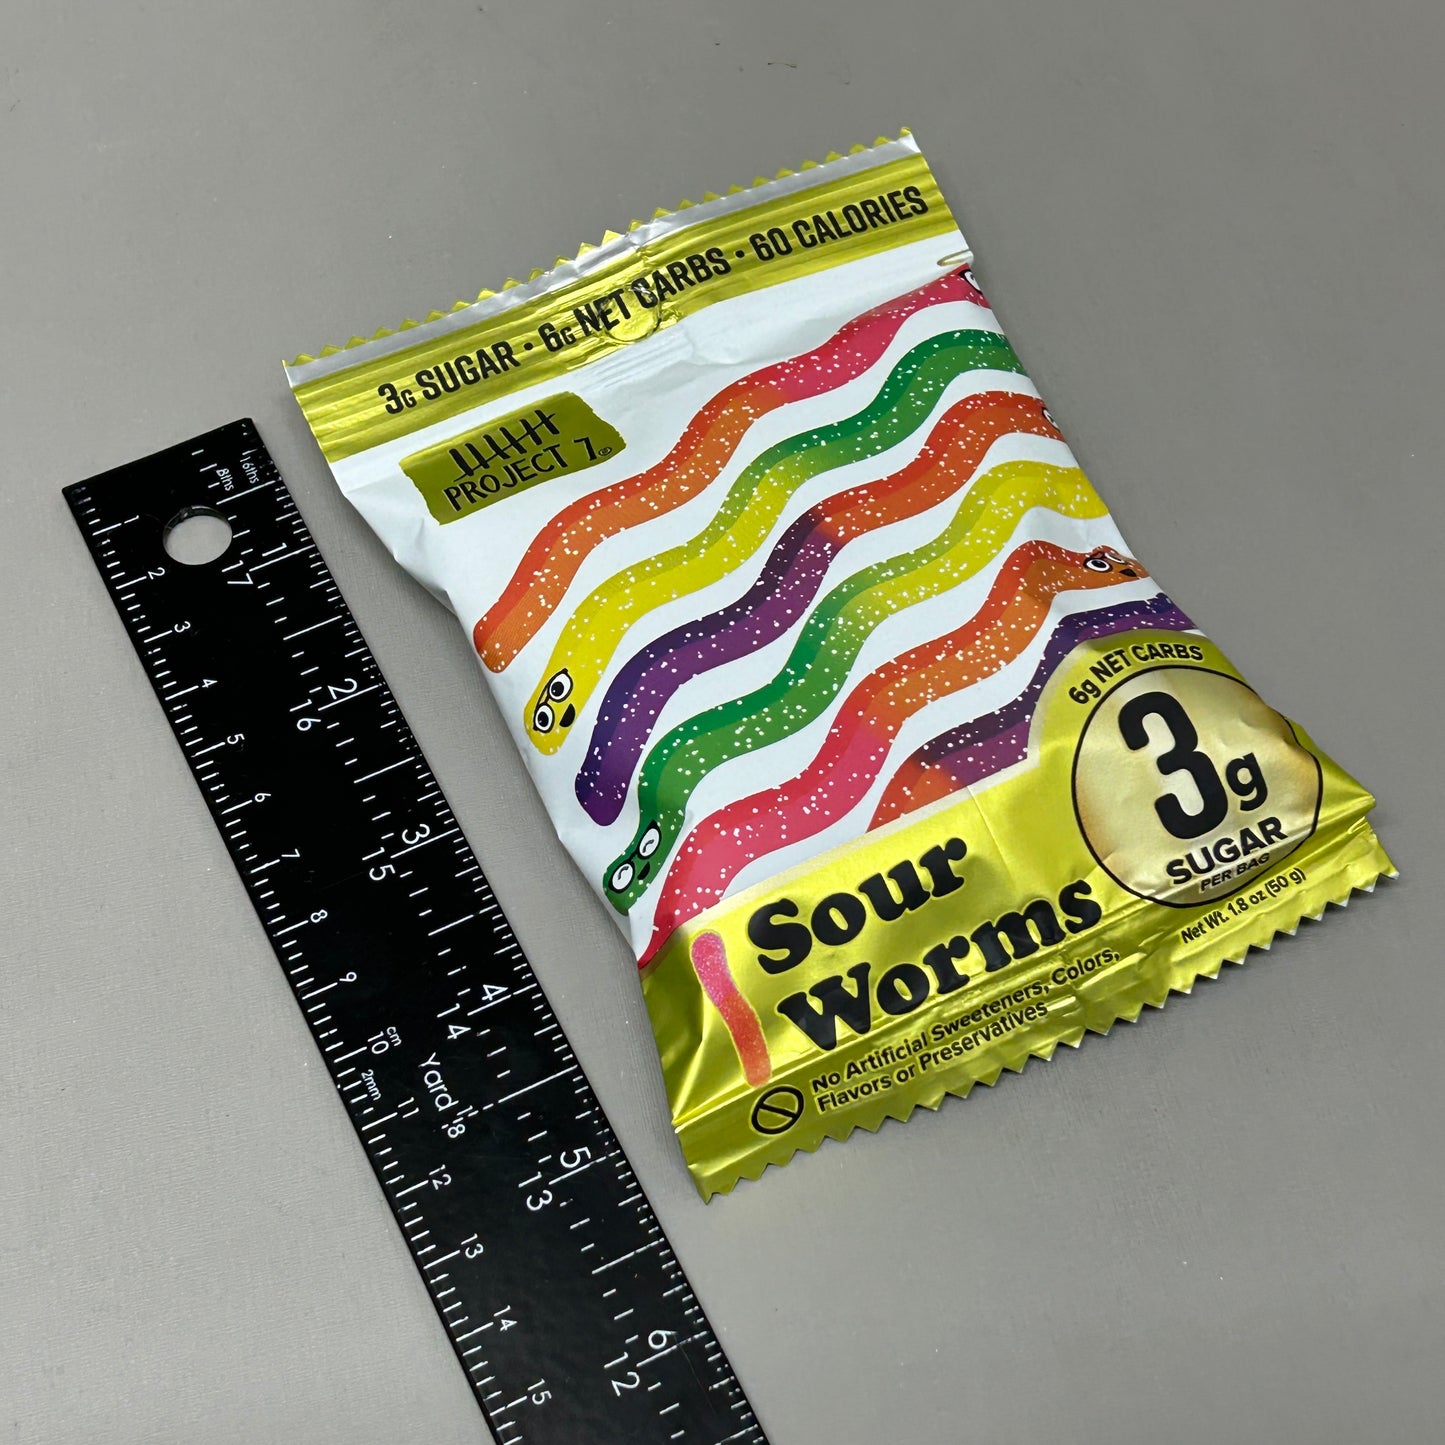 PROJECT 7 Gummy Sour Worms 8-Pack! 3 Grams of Sugar per Bag 8-1.8oz (New)